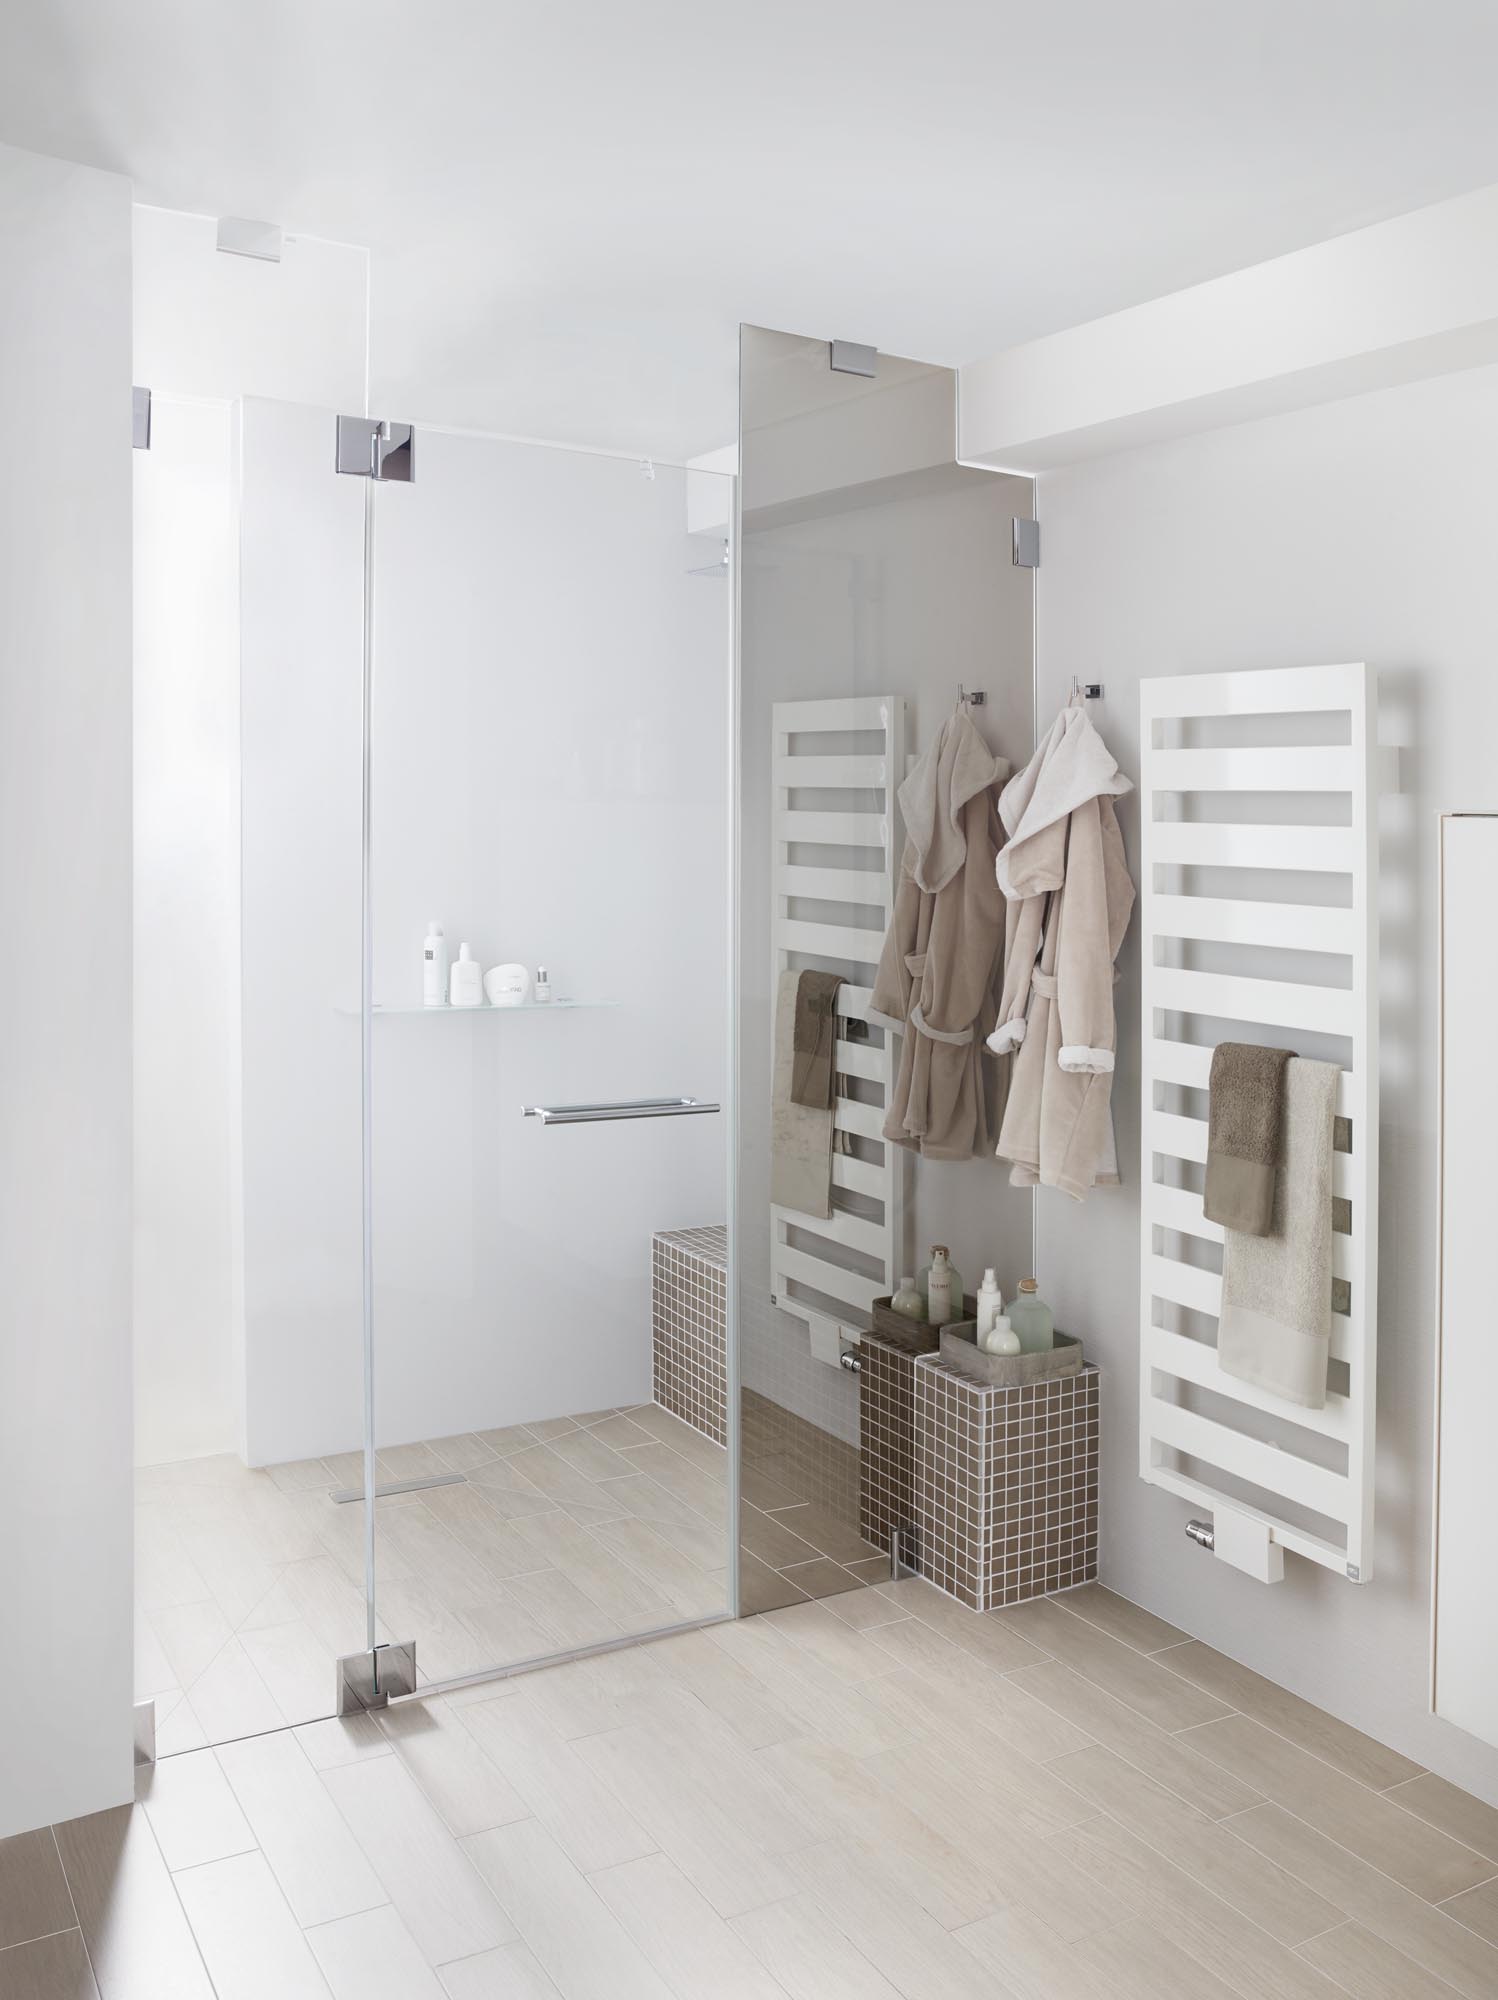 Kermi shower enclosure PASA with mirror glass and cut-outs via KermiEXTRA